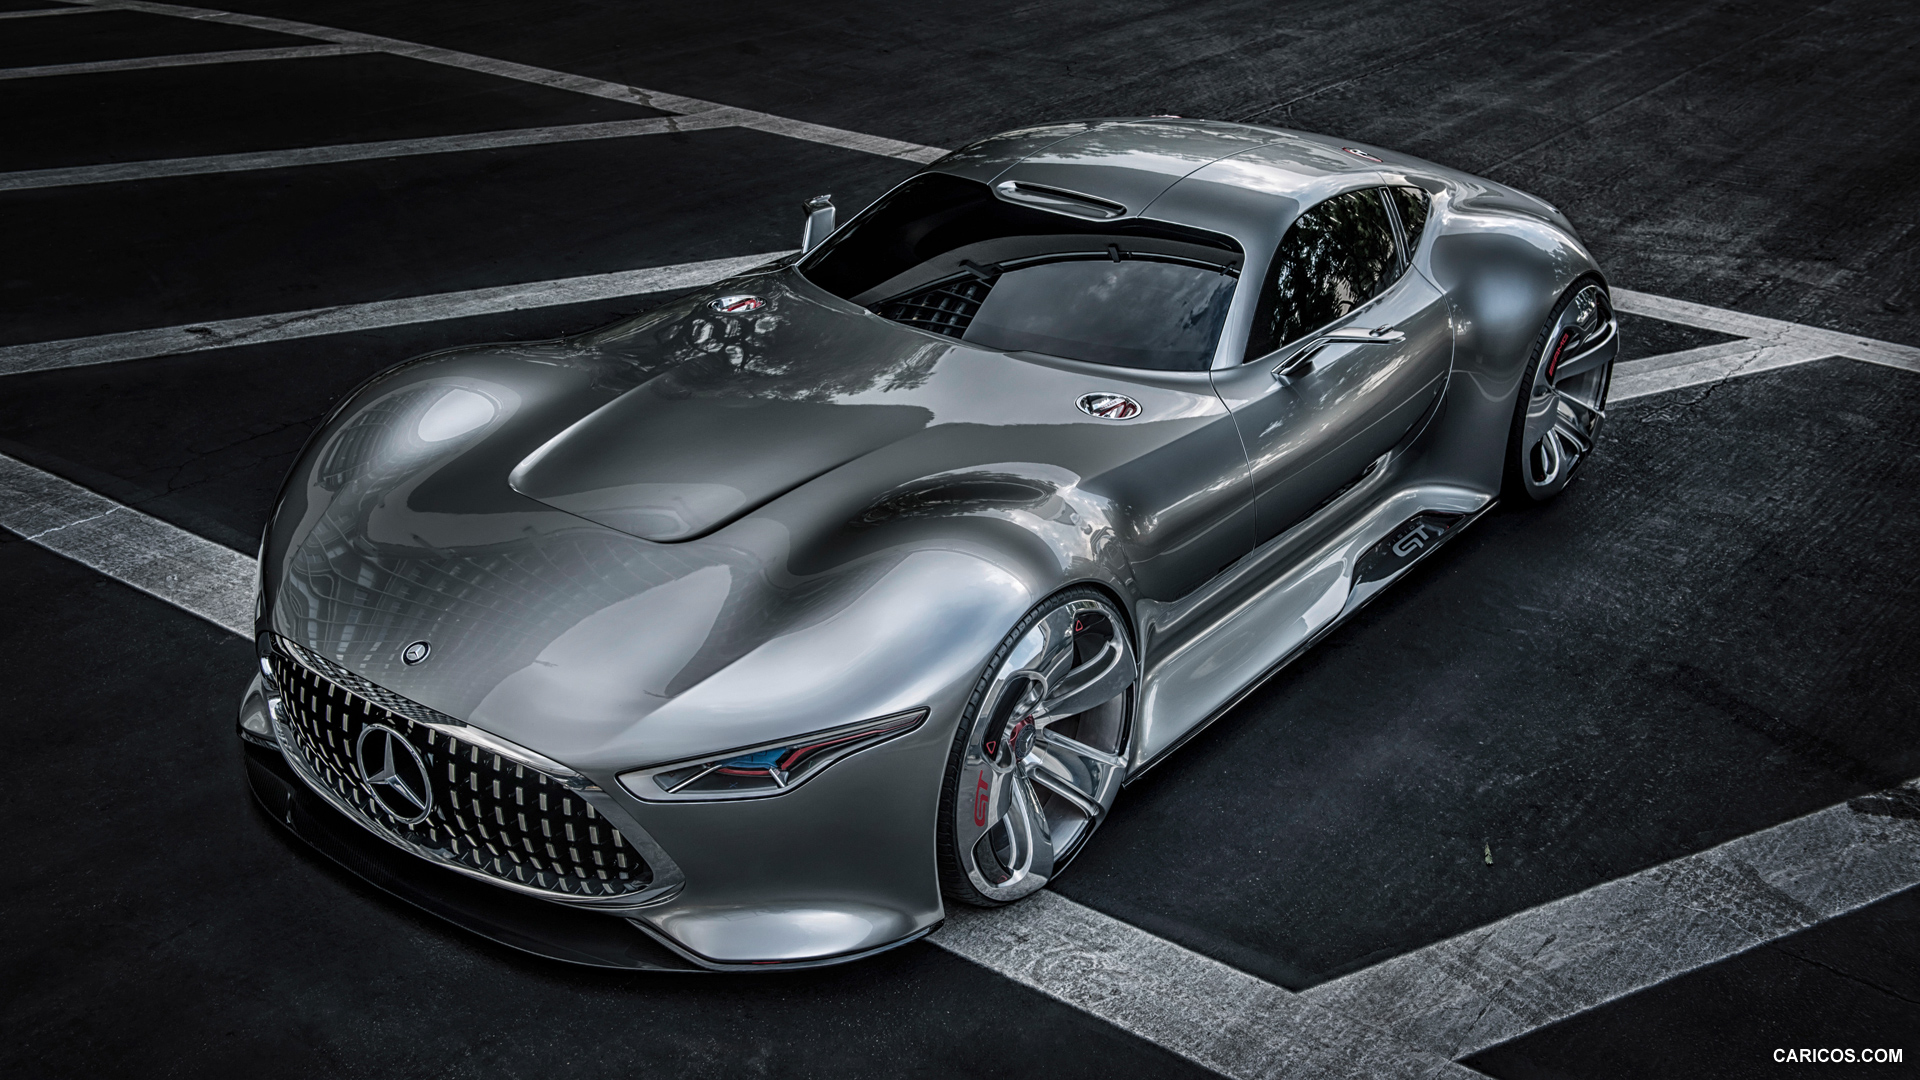 Mercedes-Benz AMG Vision Gran Turismo Concept (2013)  - Front, #7 of 25